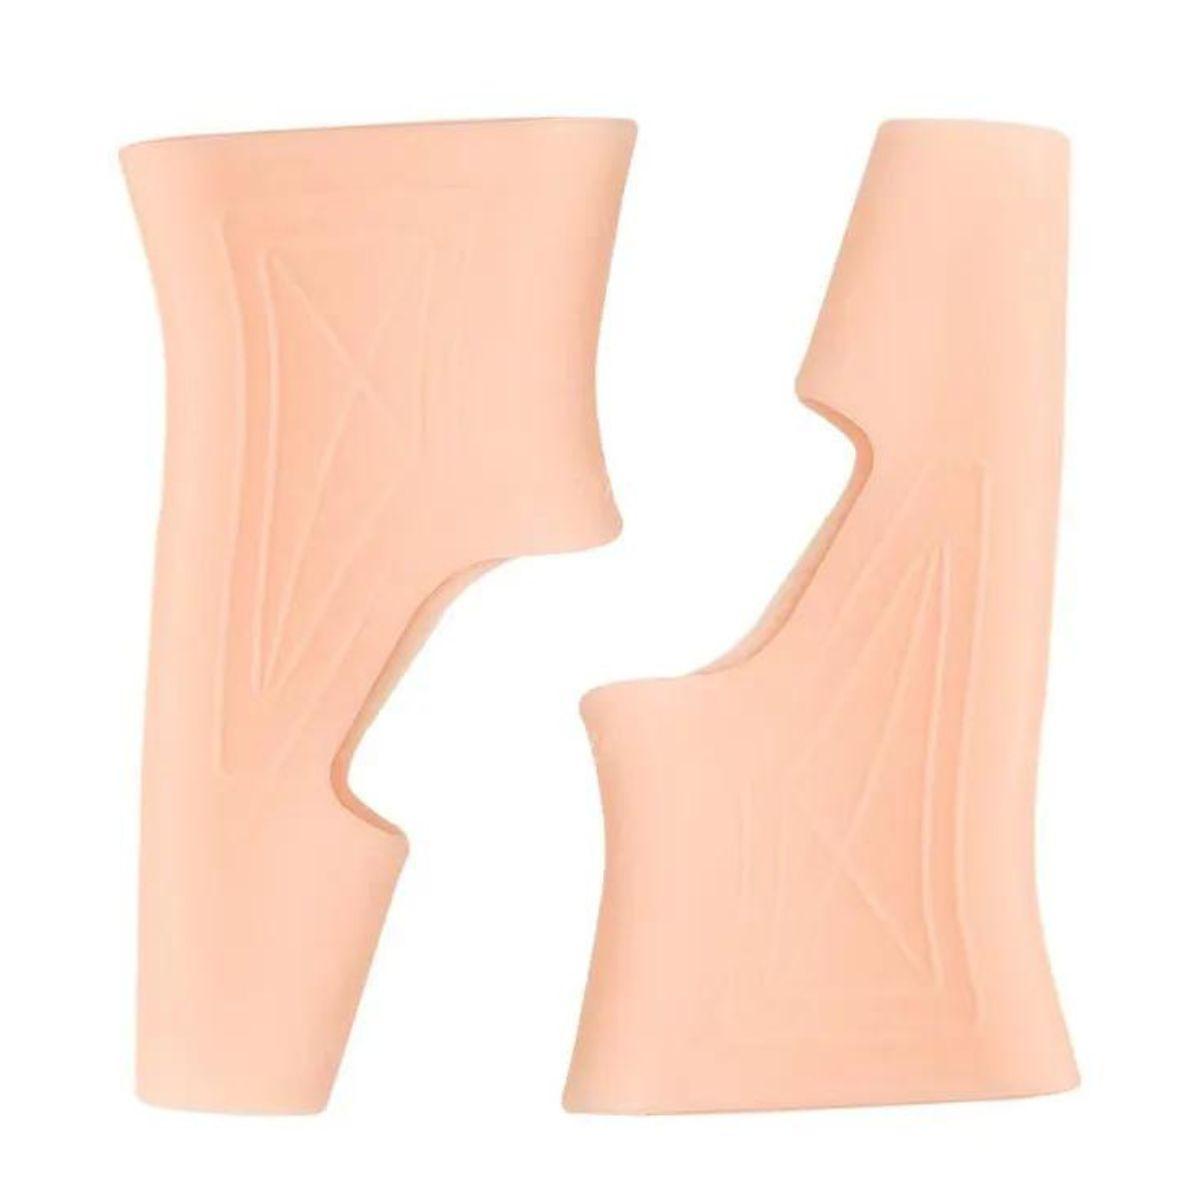 Ortho Hand Protector - tcistarhealthproducts